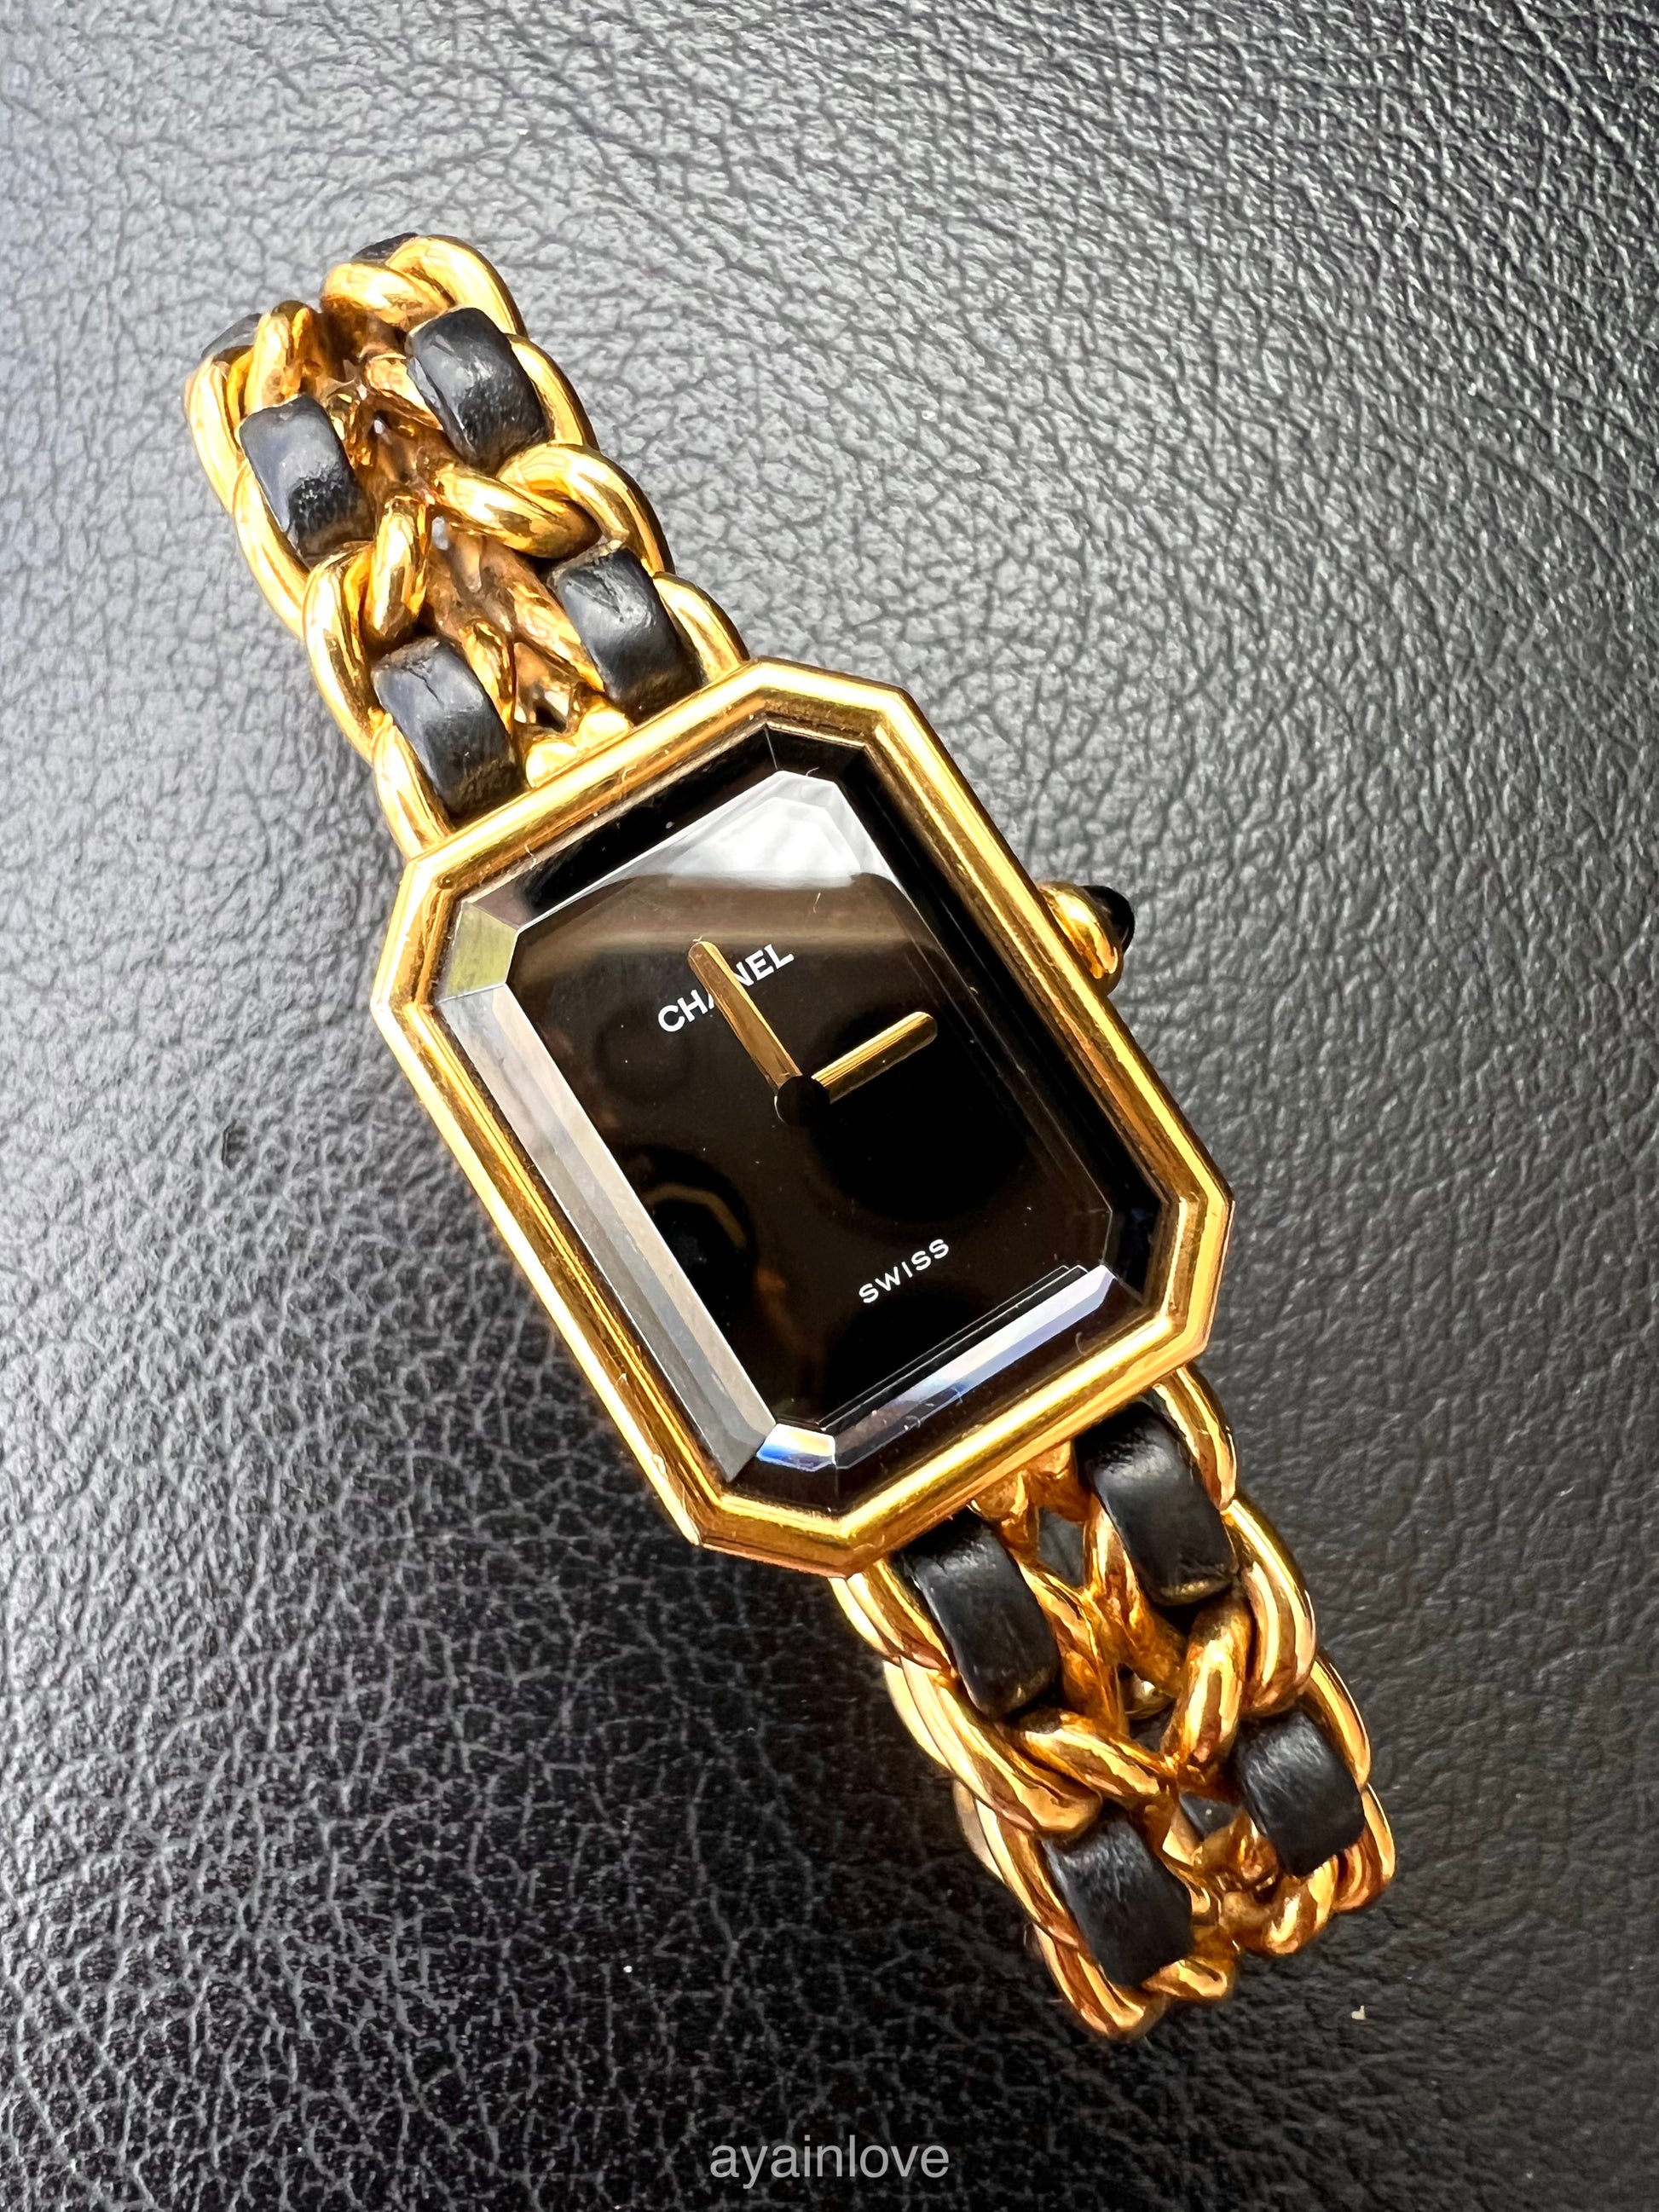 Used Chanel premiere G20-M 1987 G20-M watch ($800) for sale